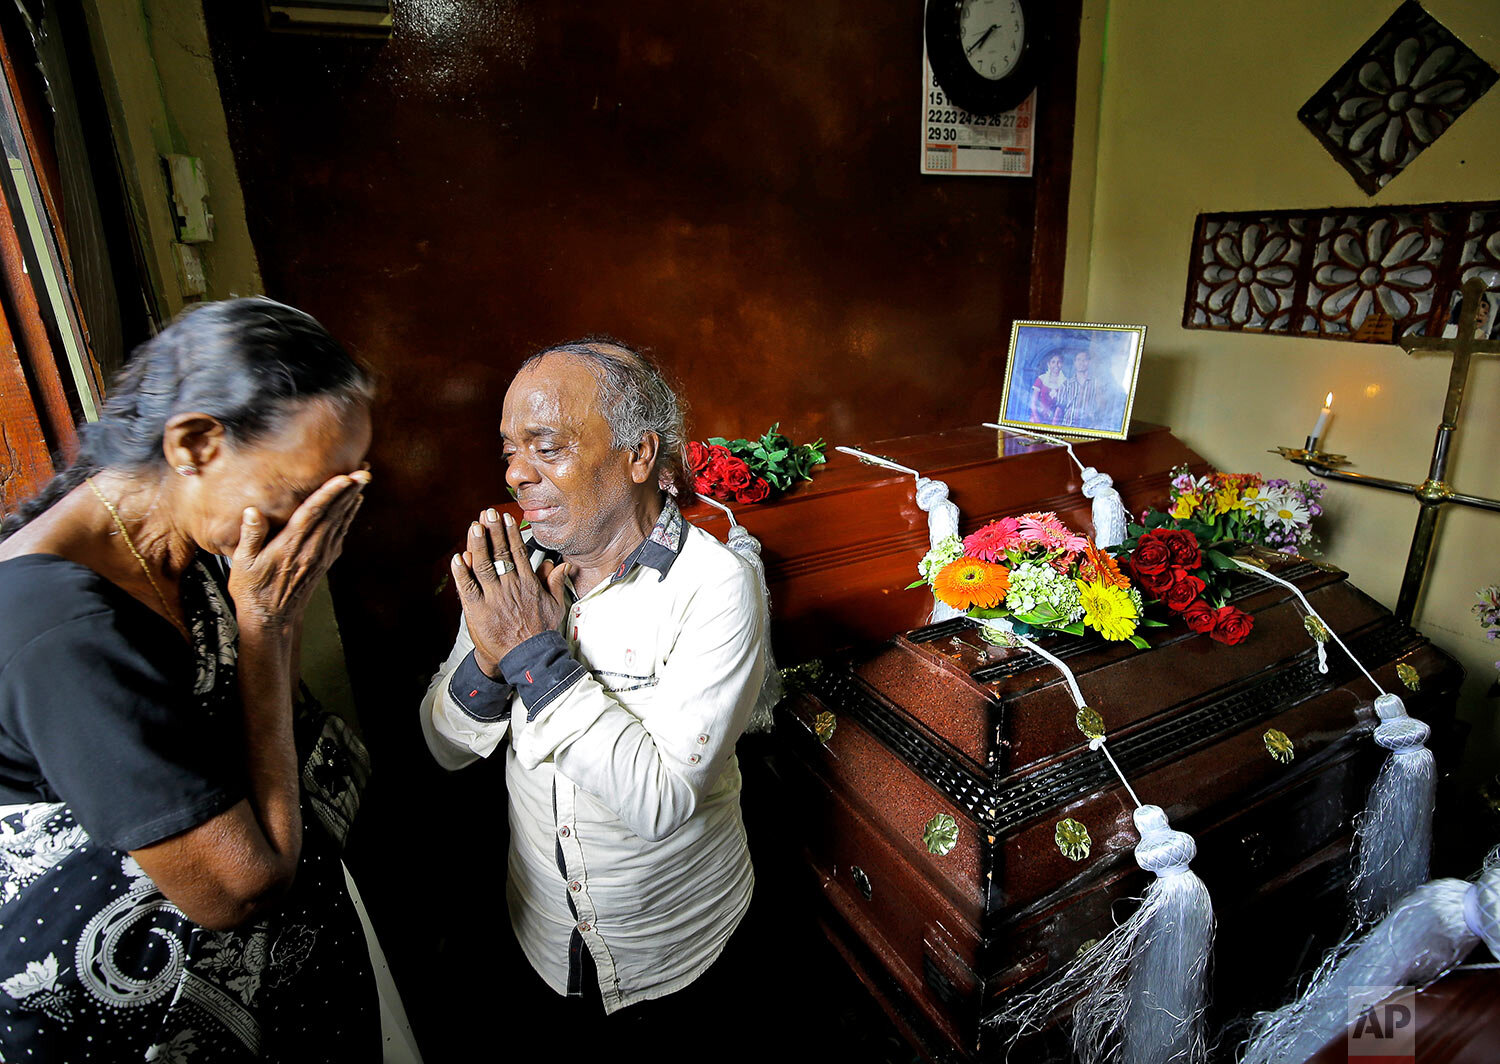  A Sri Lankan family mourns next to the coffins of their three family members, all victims of an Easter Sunday bombing, in Colombo, Sri Lanka, on April 23, 2019. (AP Photo/Eranga Jayawardena) 